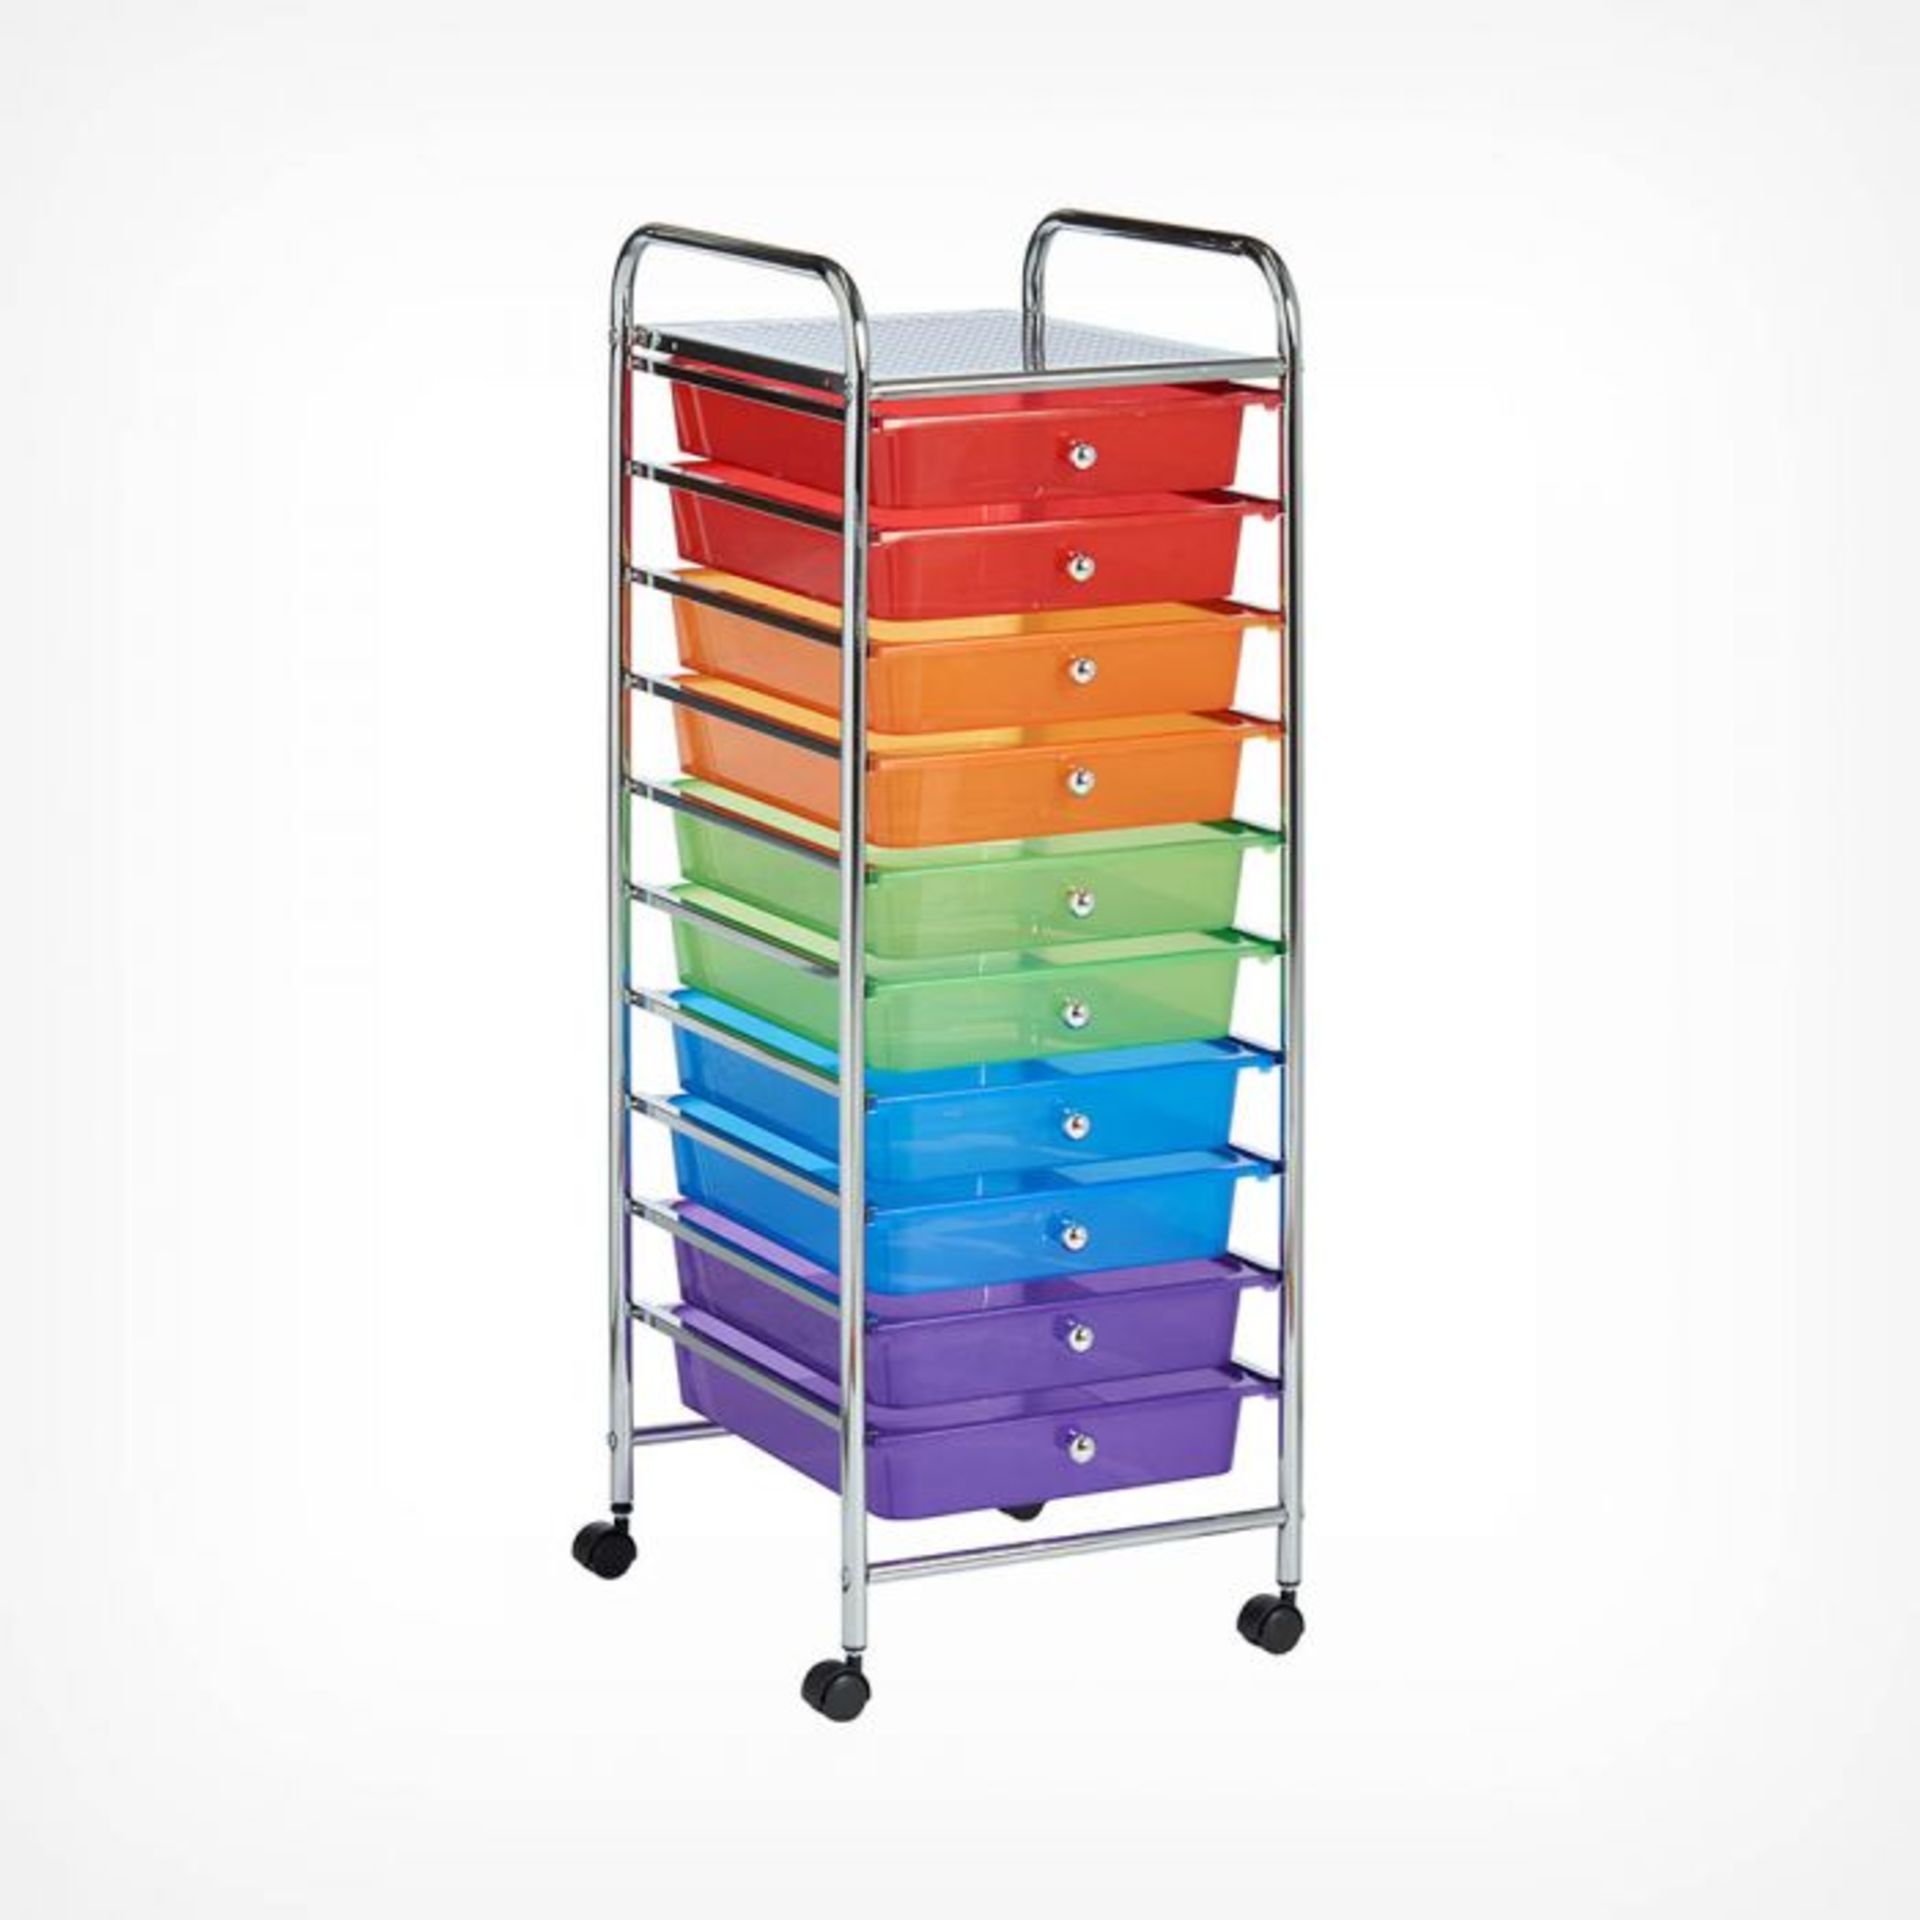 (V84) 10 Drawer Trolley - Multi Colour Versatile 10 drawer storage trolley - great for homes, ... - Image 2 of 4